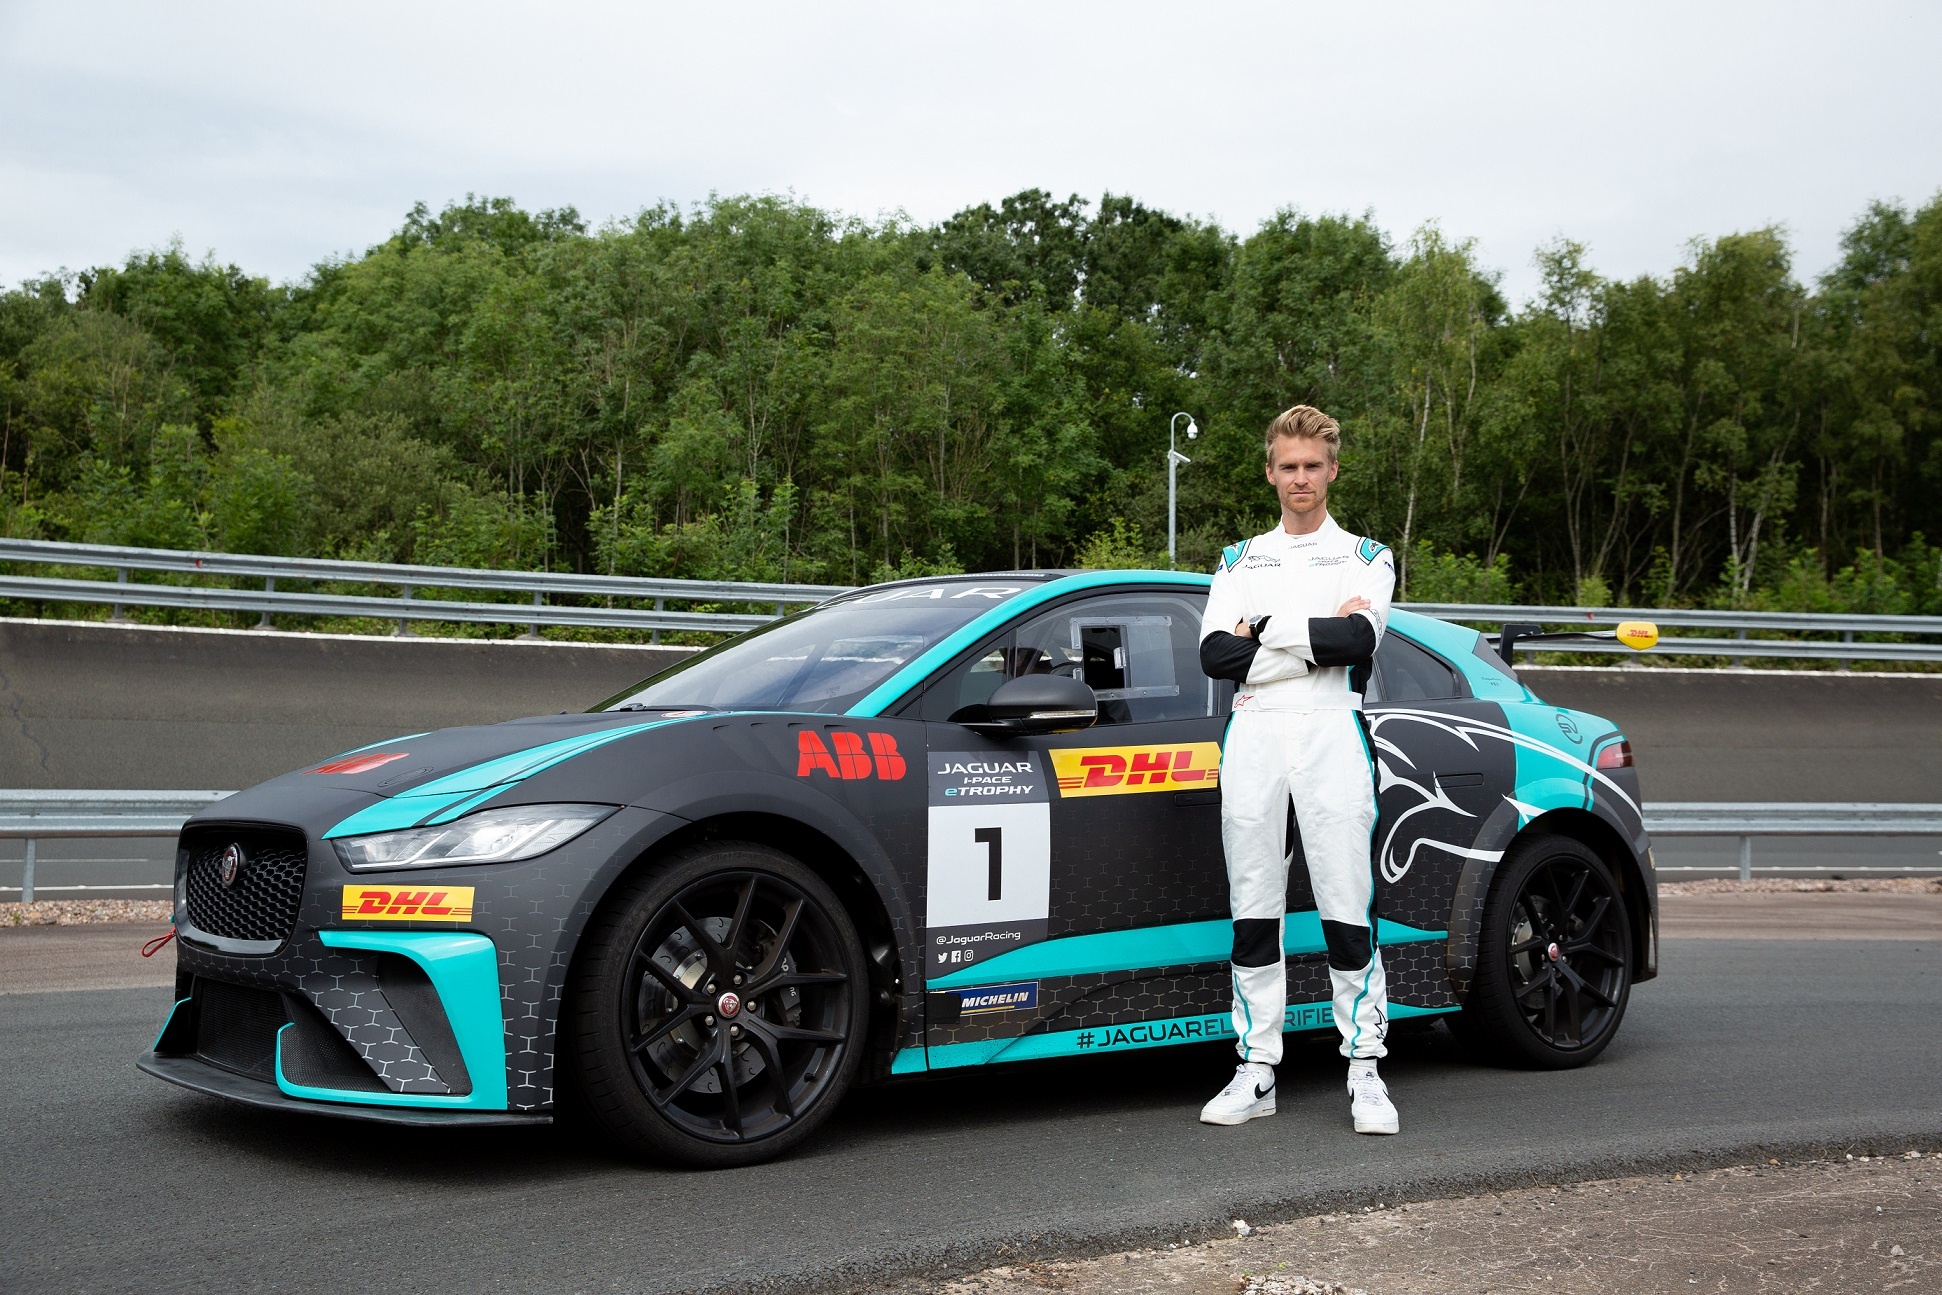 VIP DRIVERS ANNOUNCED FOR THE JAGUAR I-PACE eTROPHY ‘LOCKDOWN SHOWDOWN’ IN BERLIN